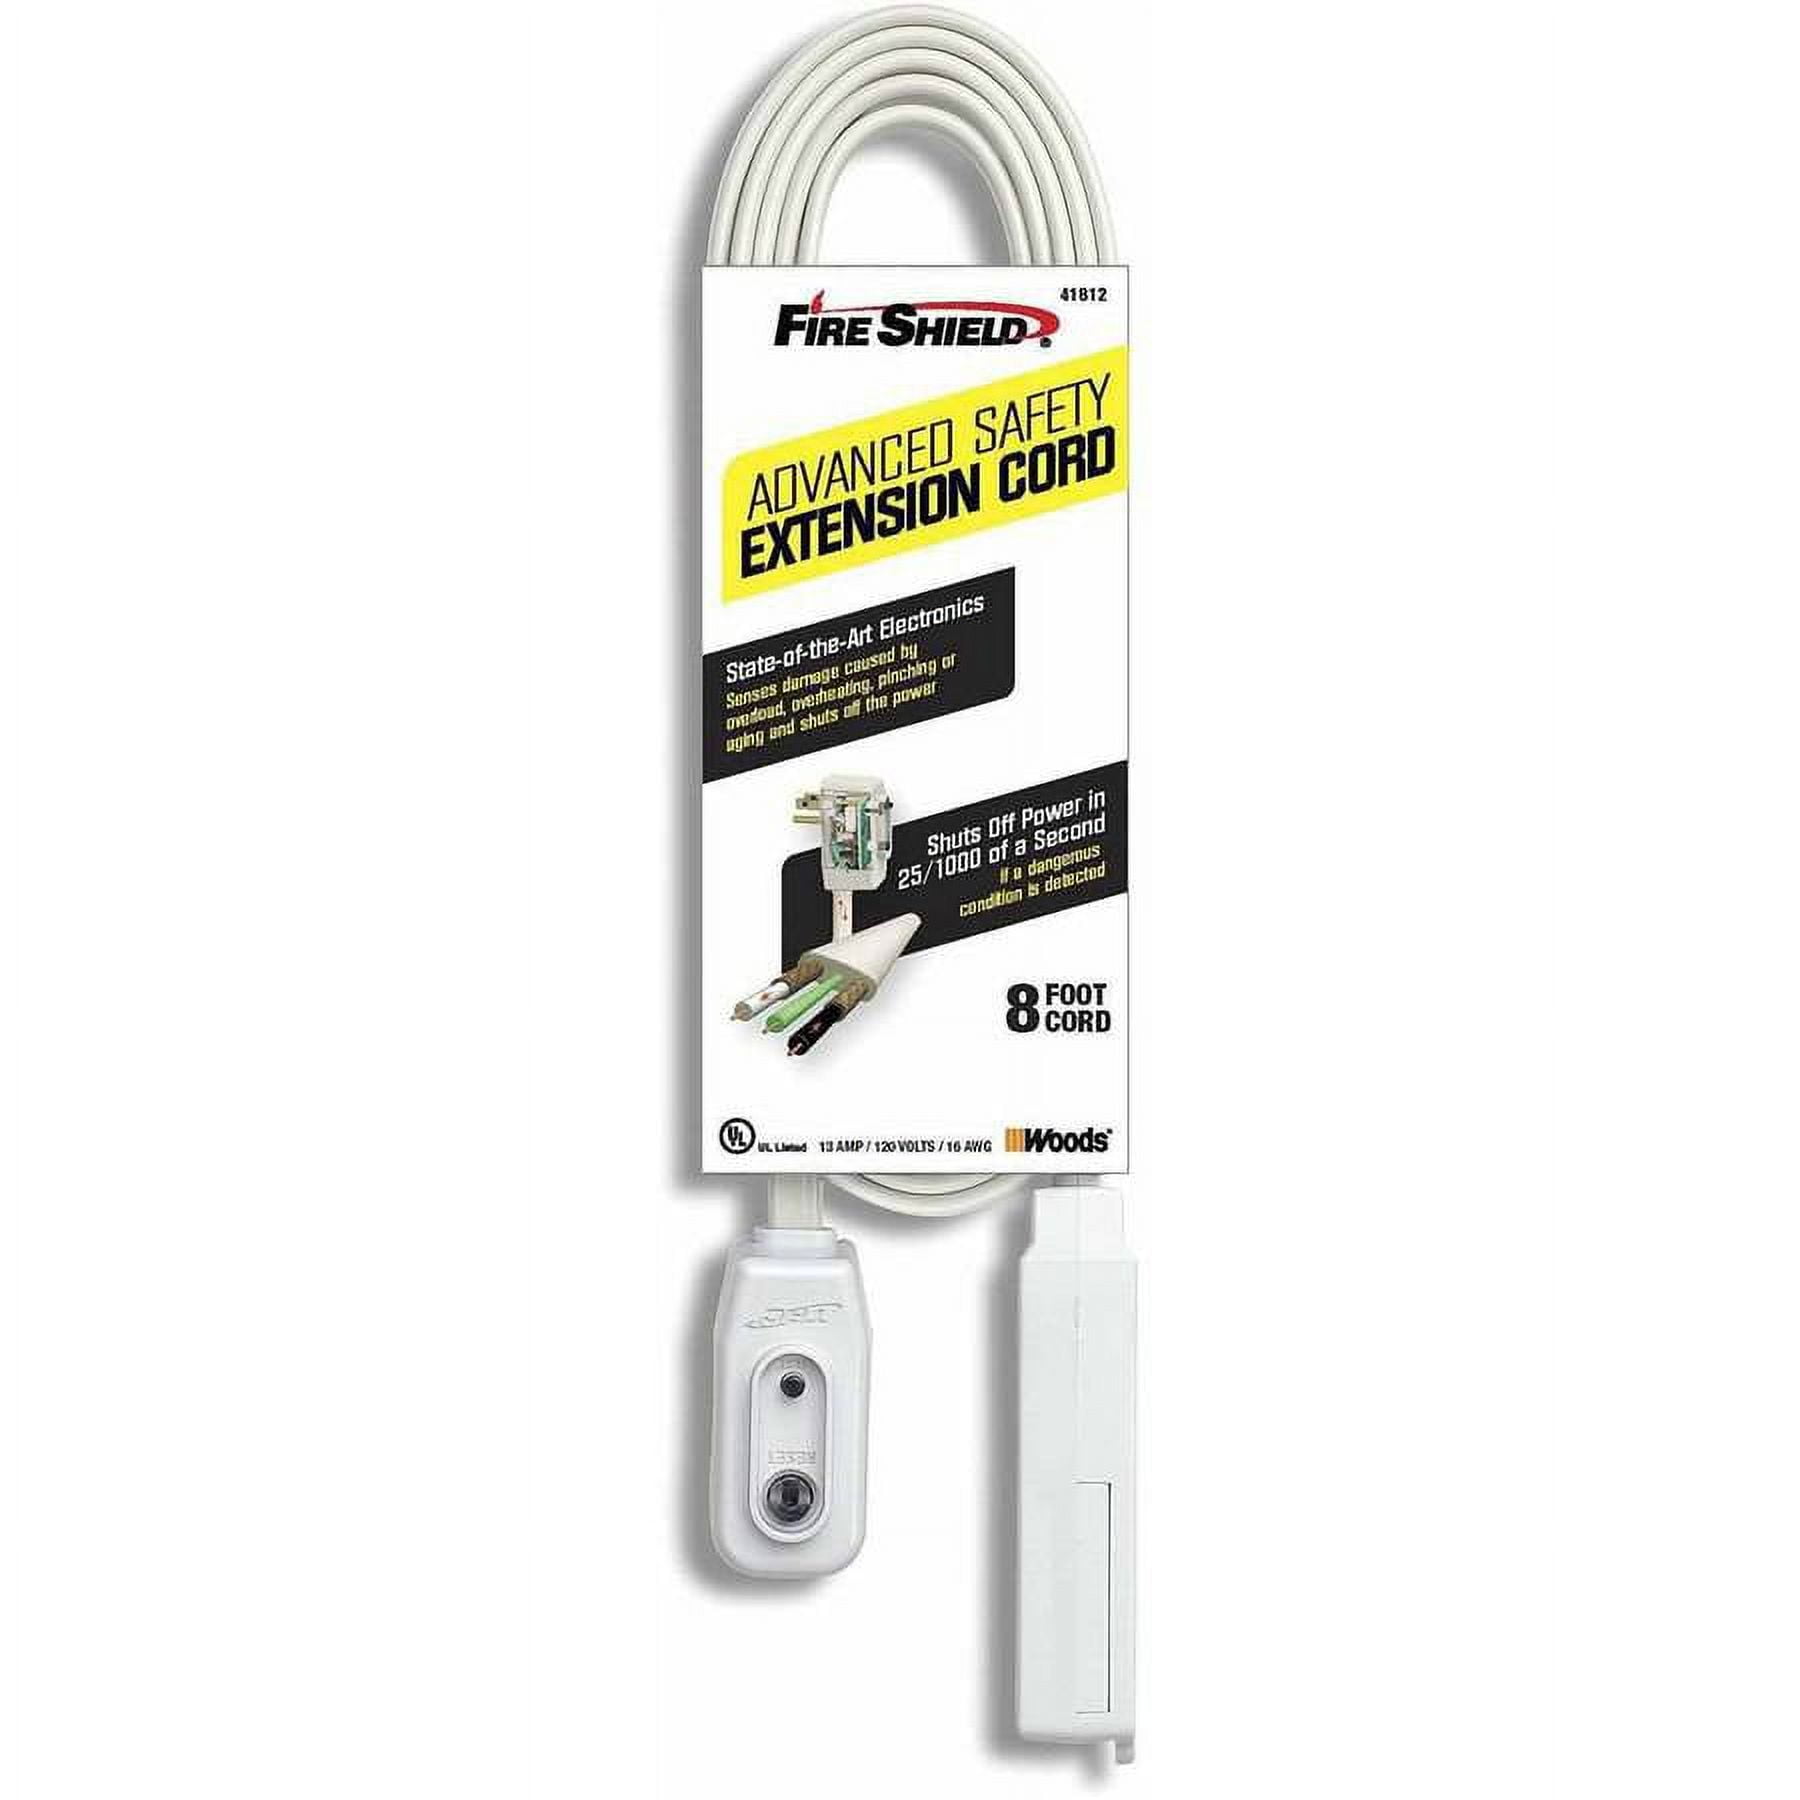 Fire Shield 41812 Advanced Safety Extension Cord, 16/3, 8' Cord 